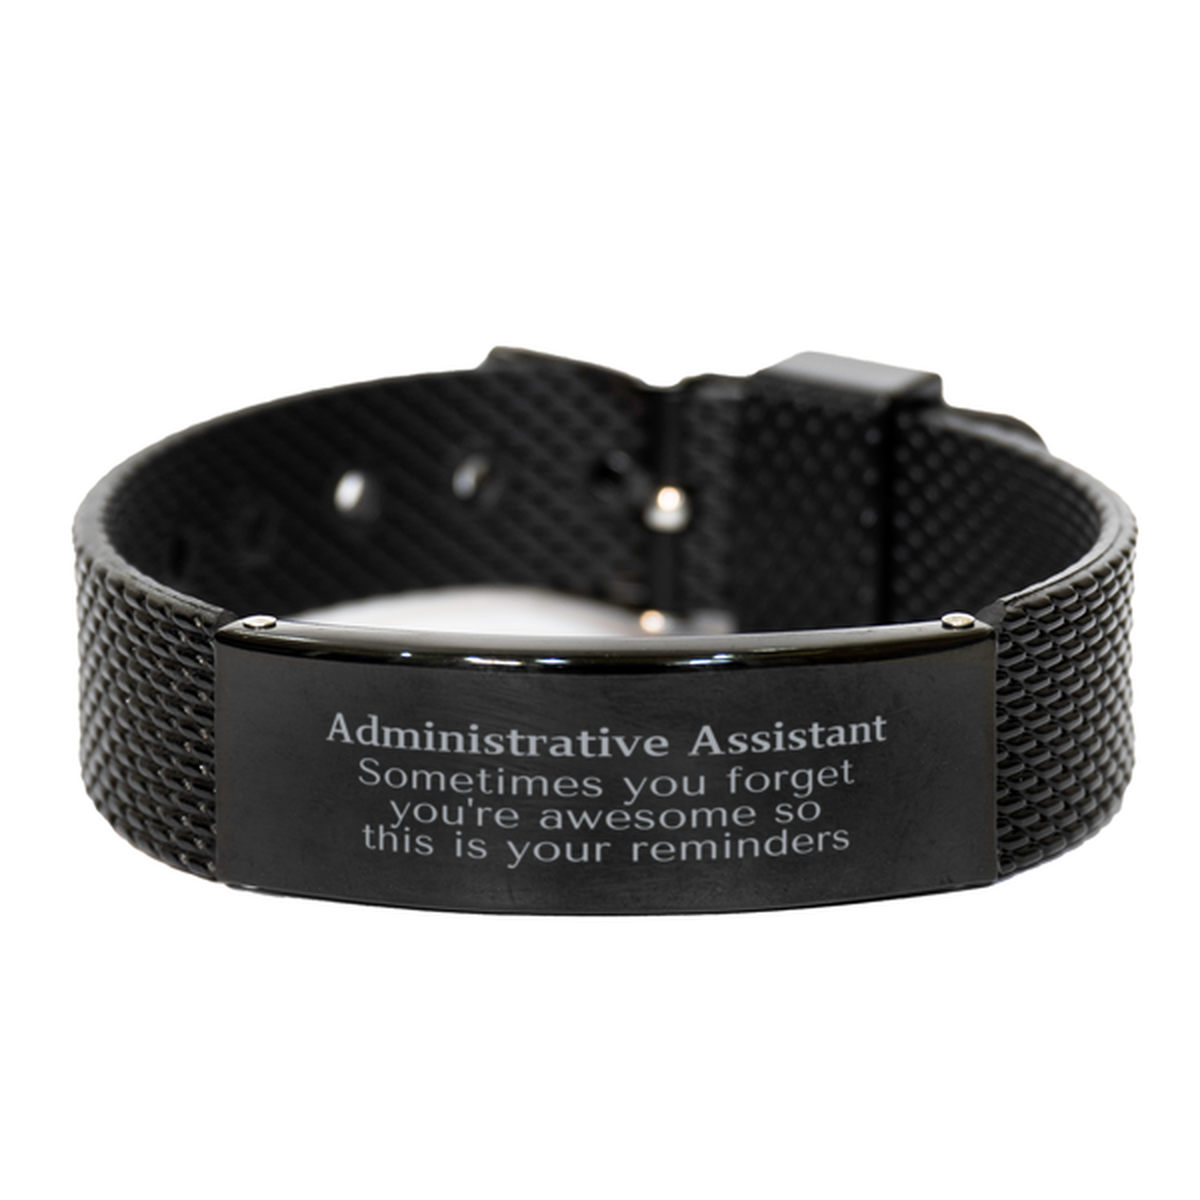 Sentimental Administrative Assistant Black Shark Mesh Bracelet, Administrative Assistant Sometimes you forget you're awesome so this is your reminders, Graduation Christmas Birthday Gifts for Administrative Assistant, Men, Women, Coworkers